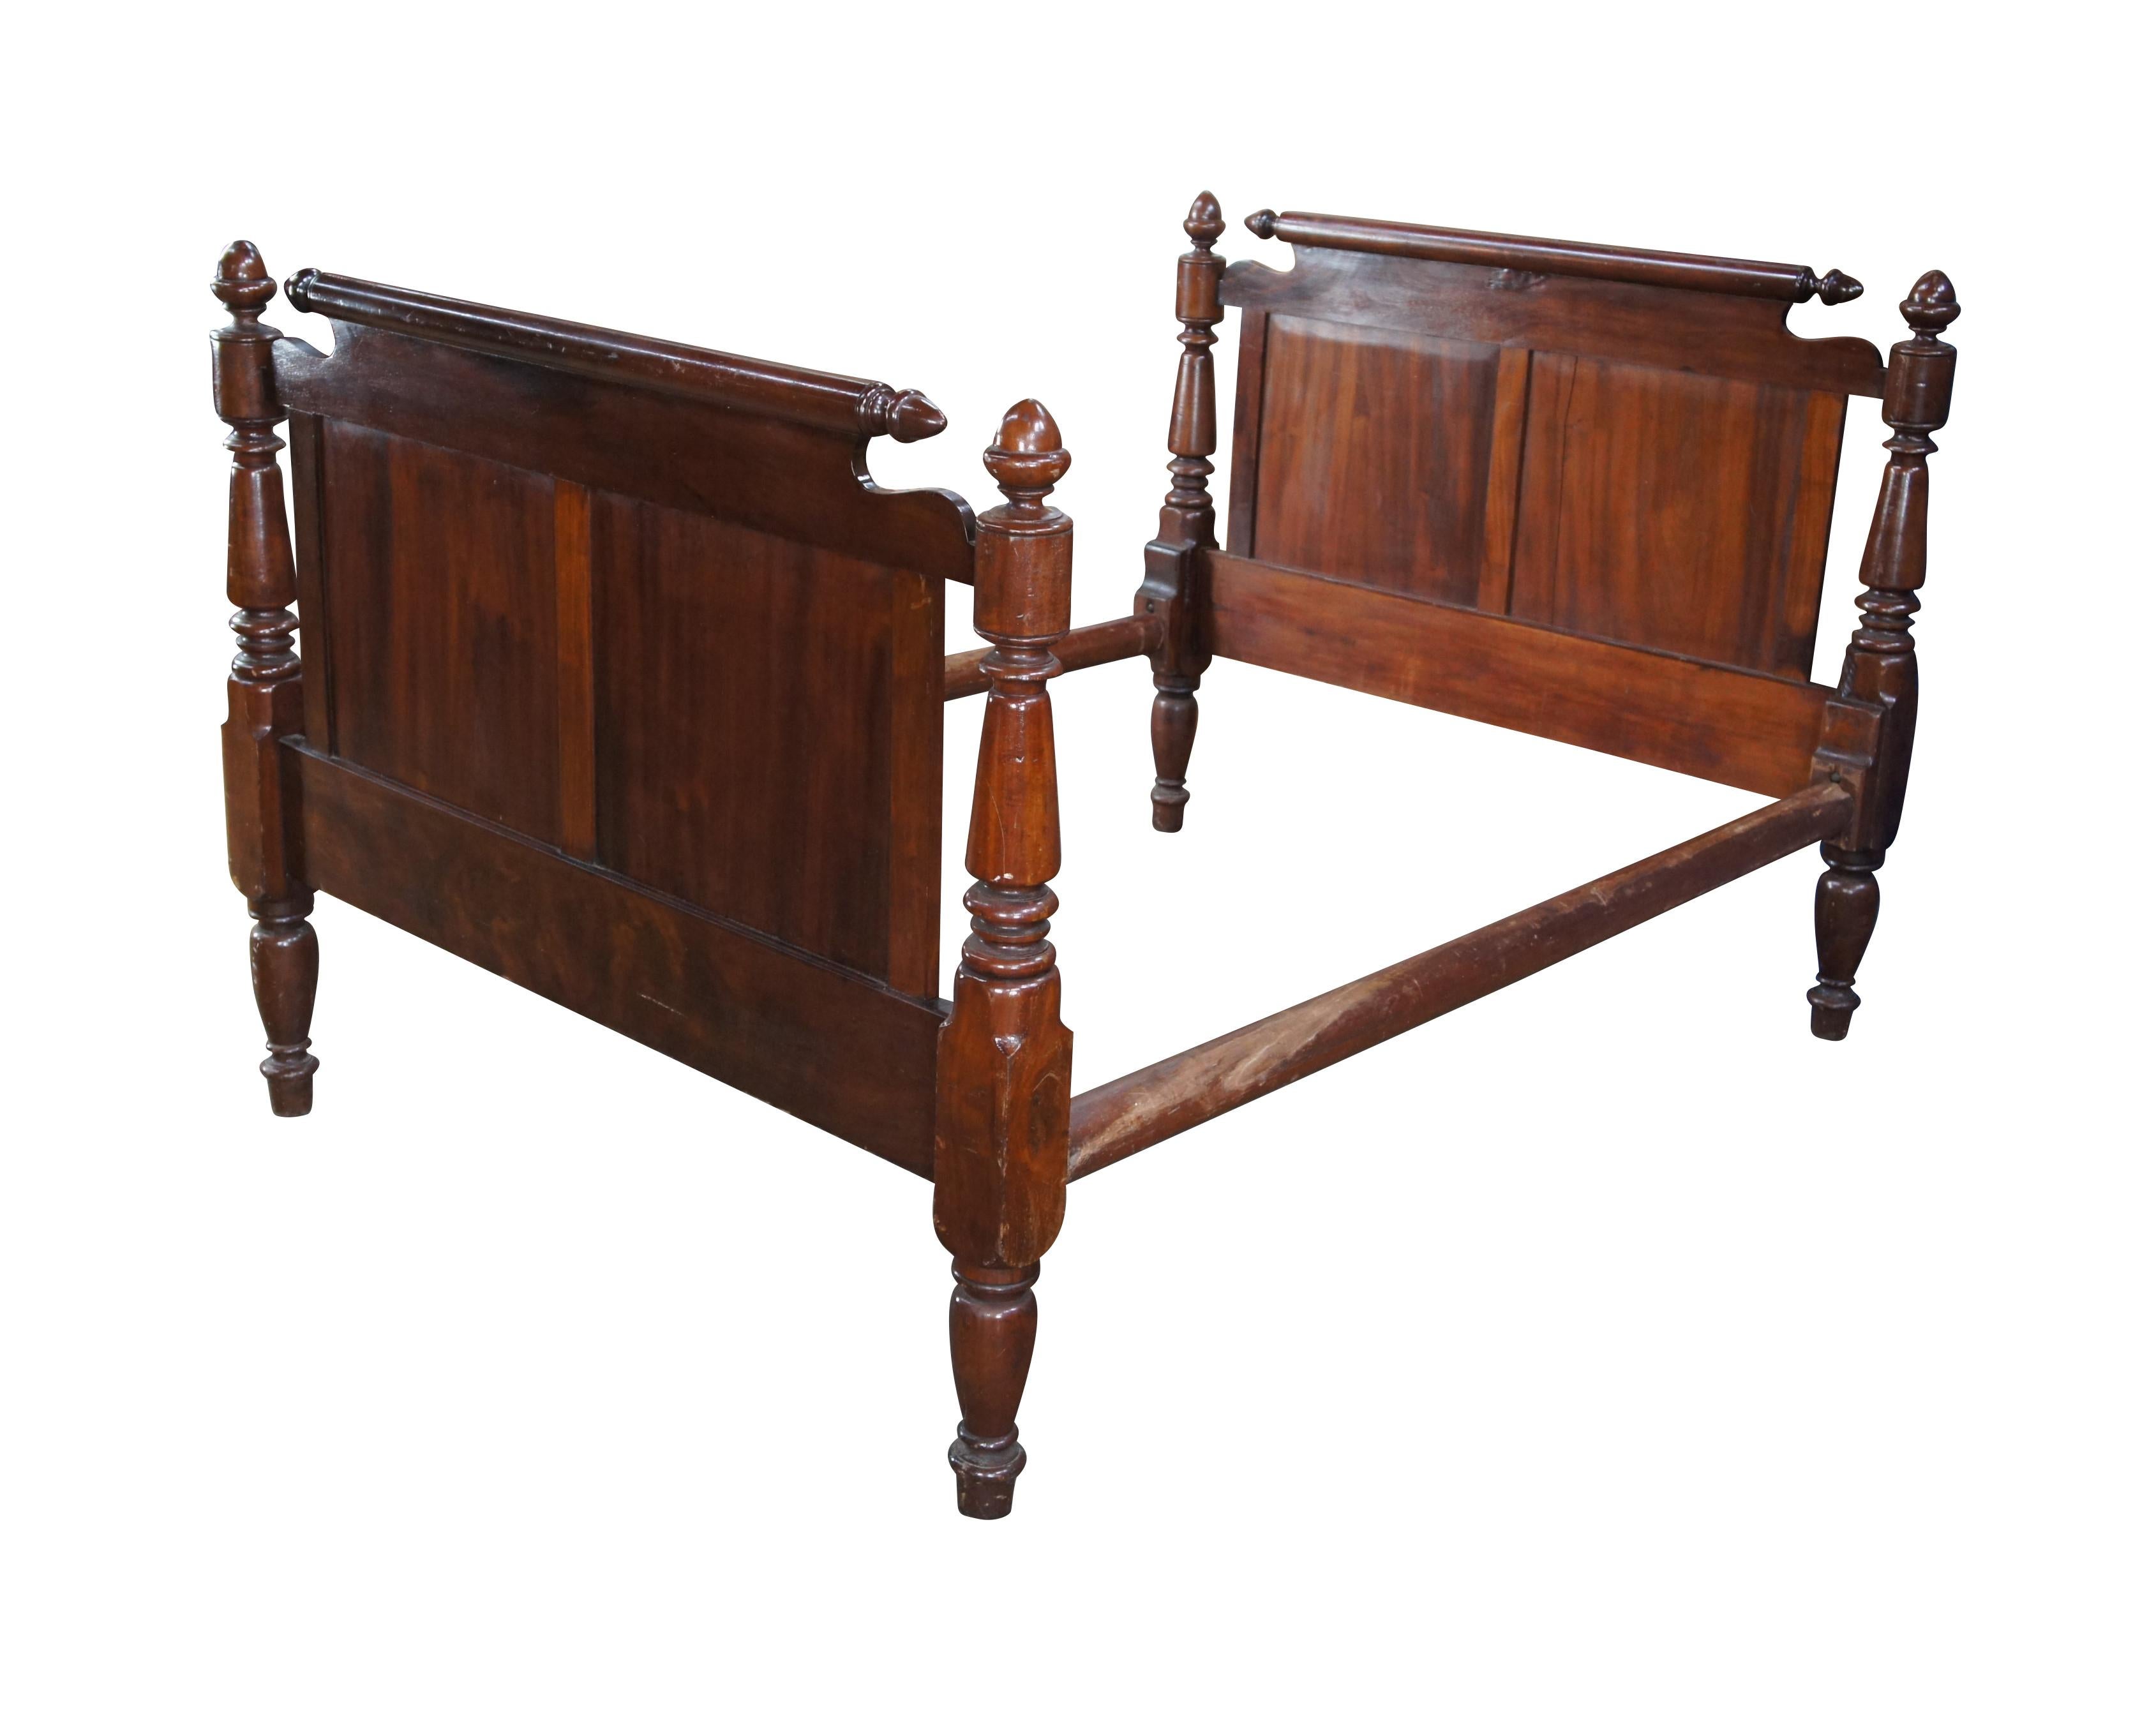 Early 19th century Sheraton Period poster bed.  Made from mahogany with hand turned posts and acorn finials.  Unique mechanism allows slats turn into place via wooden thread.  Can be used with a full size mattress.  Supports or plywood will need to